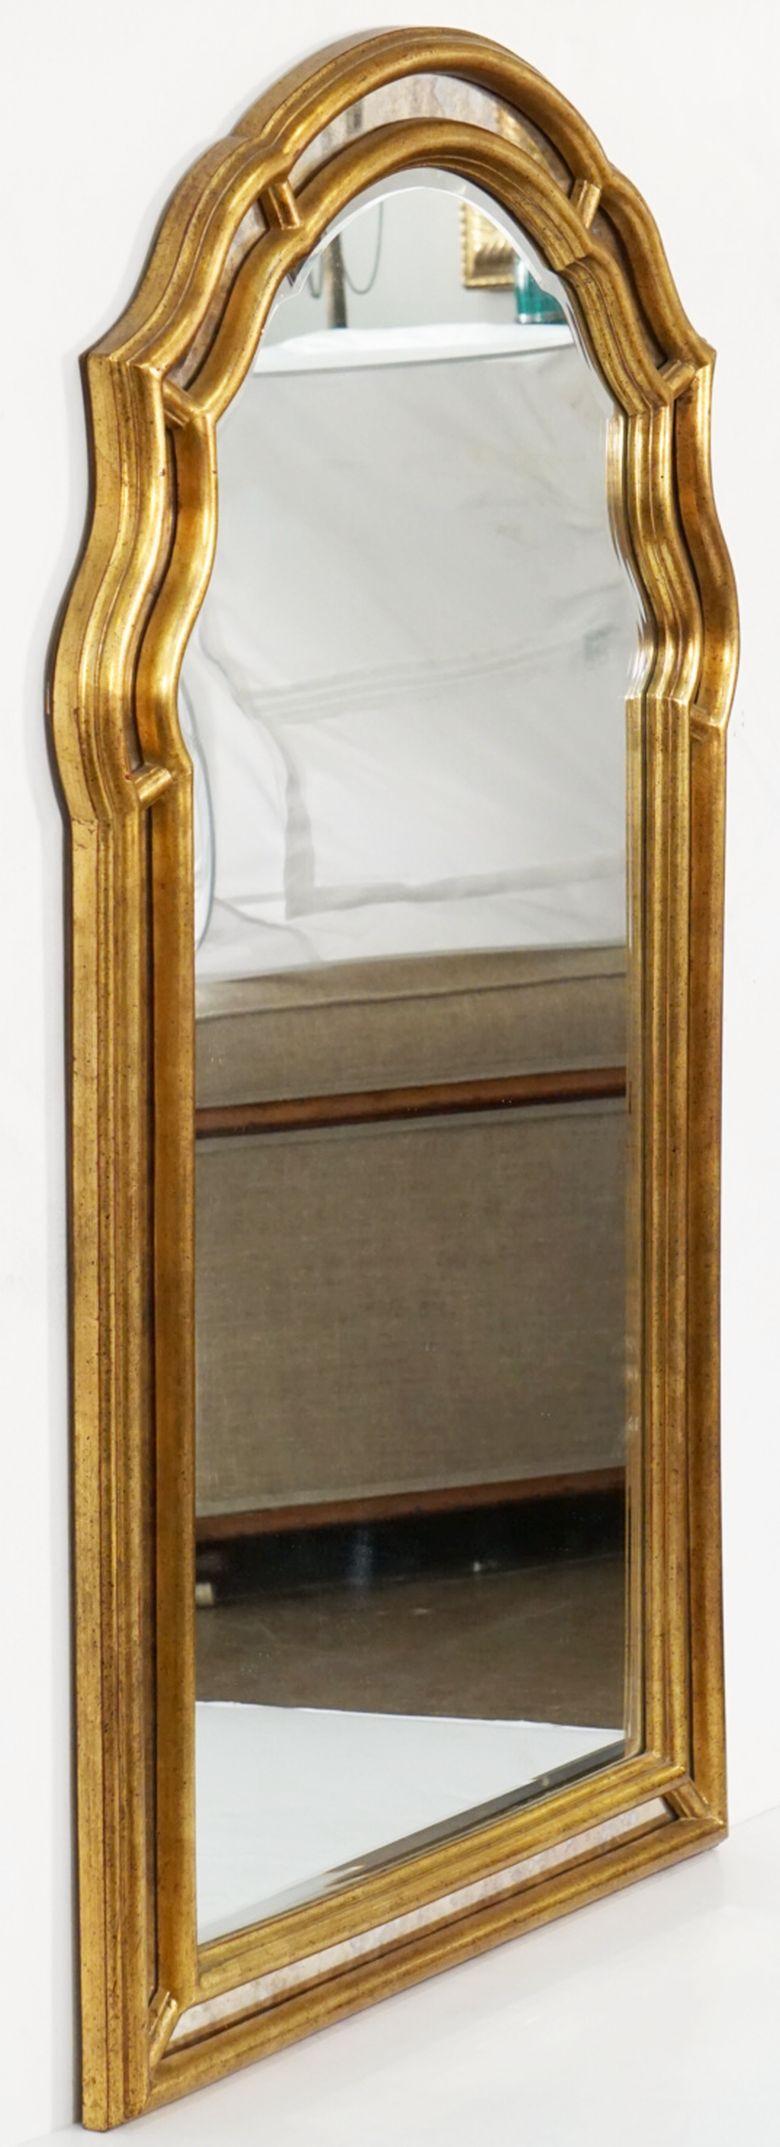 A large vintage French gilt wall mirror in the Hollywood Regency style - featuring a serpentine arch-top and segmented mirror gilt frame.